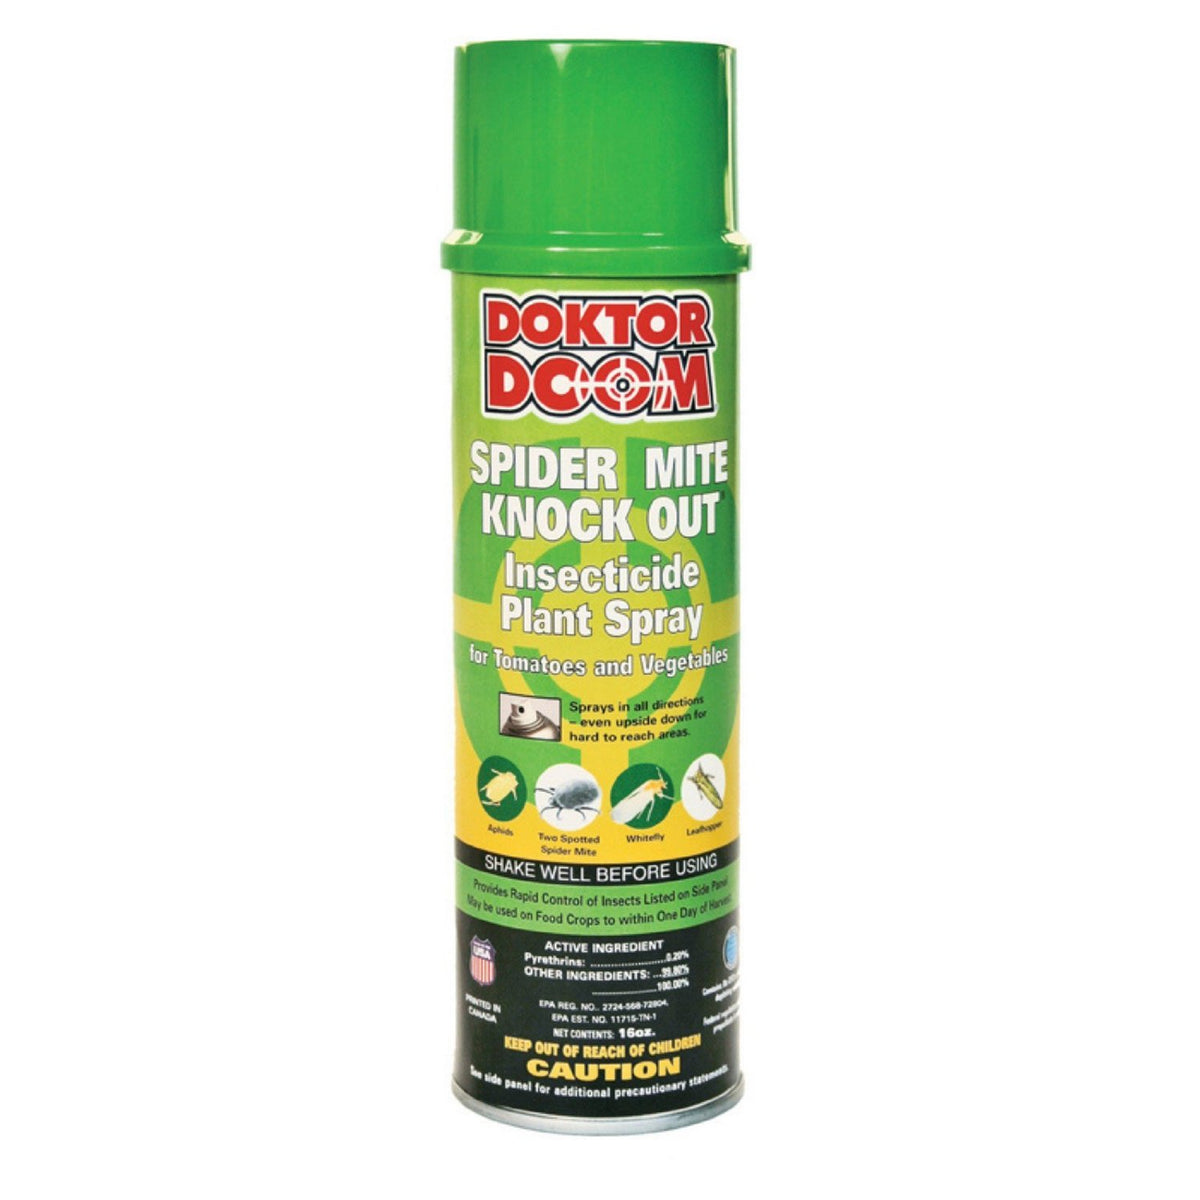 Doktor Doom Spider Mite Knock Out Insecticide Plant Spray, 16 Oz